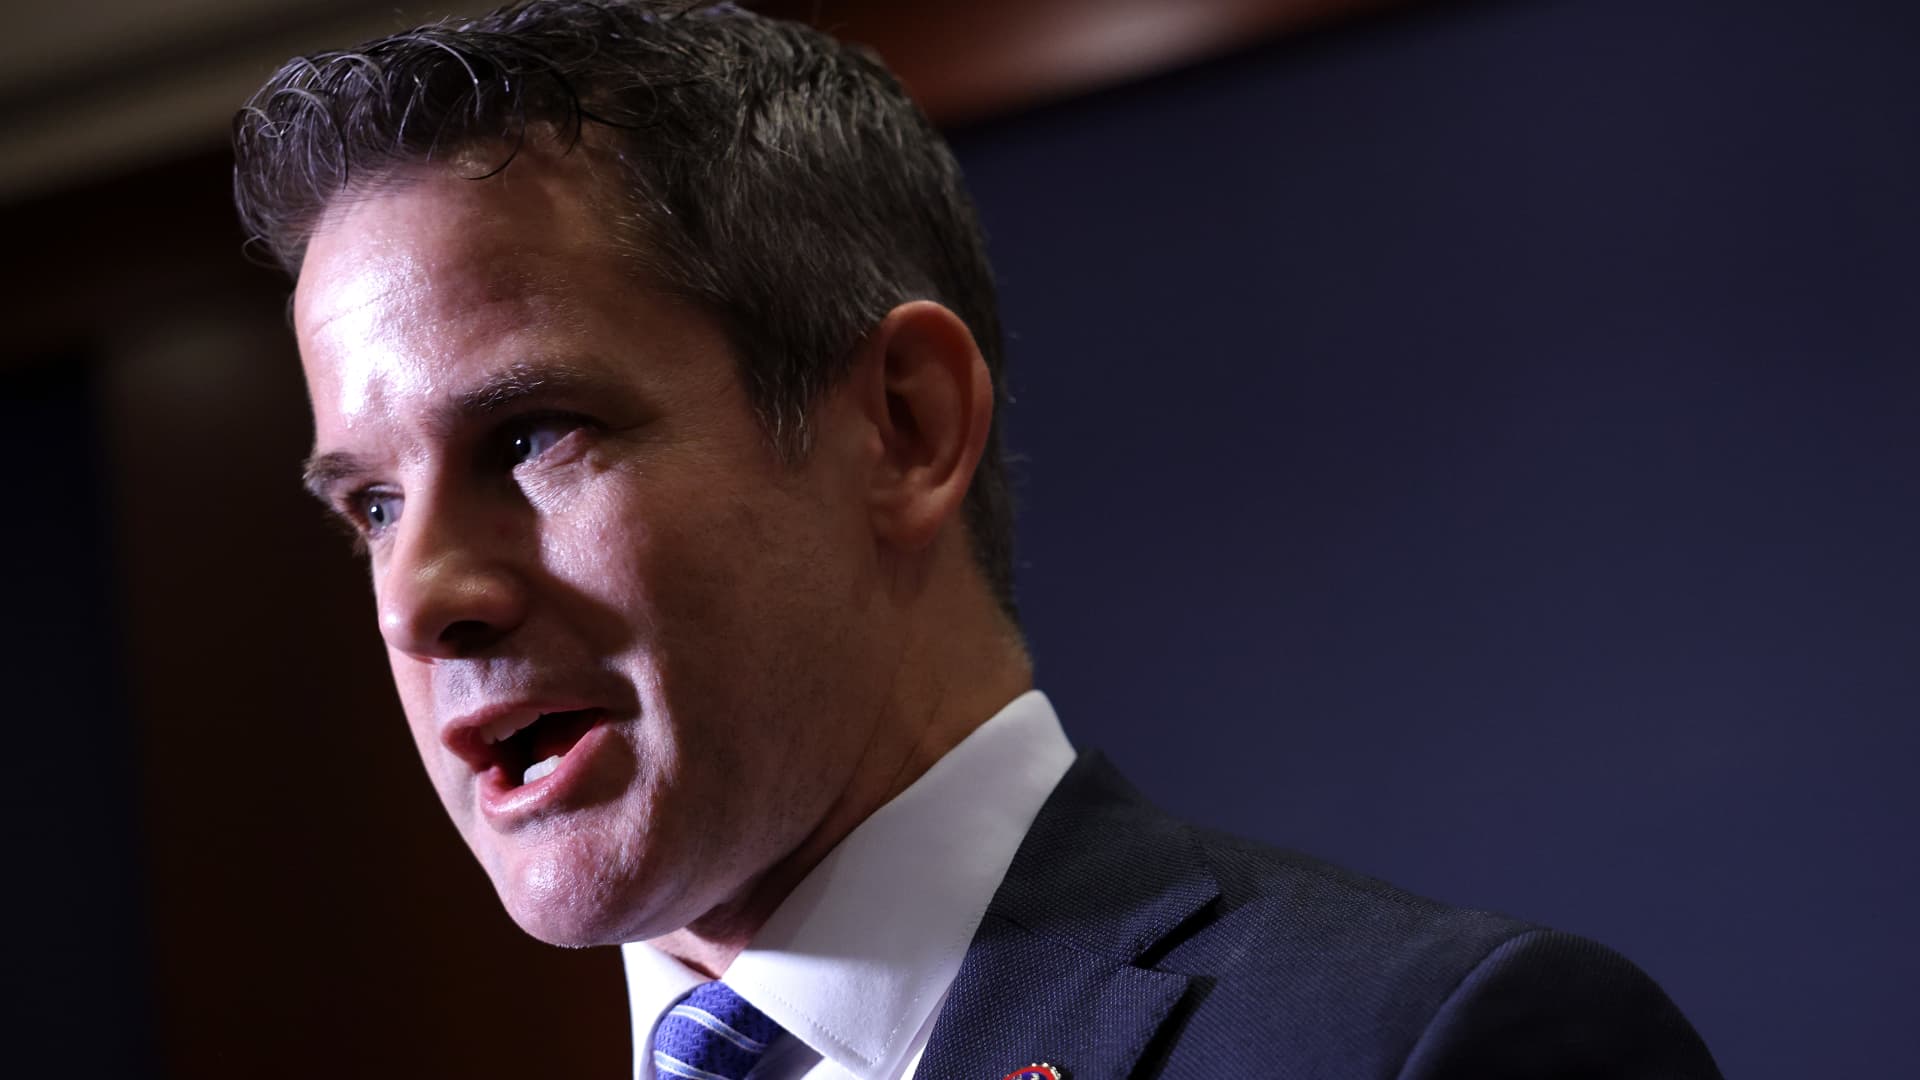 Rep. Adam Kinzinger (R-IL) speaks after the Republican House caucus voted to remove Rep. Liz Cheney (R-WY) of her leadership, at the U.S. Capitol on on May 12, 2021 in Washington, DC.